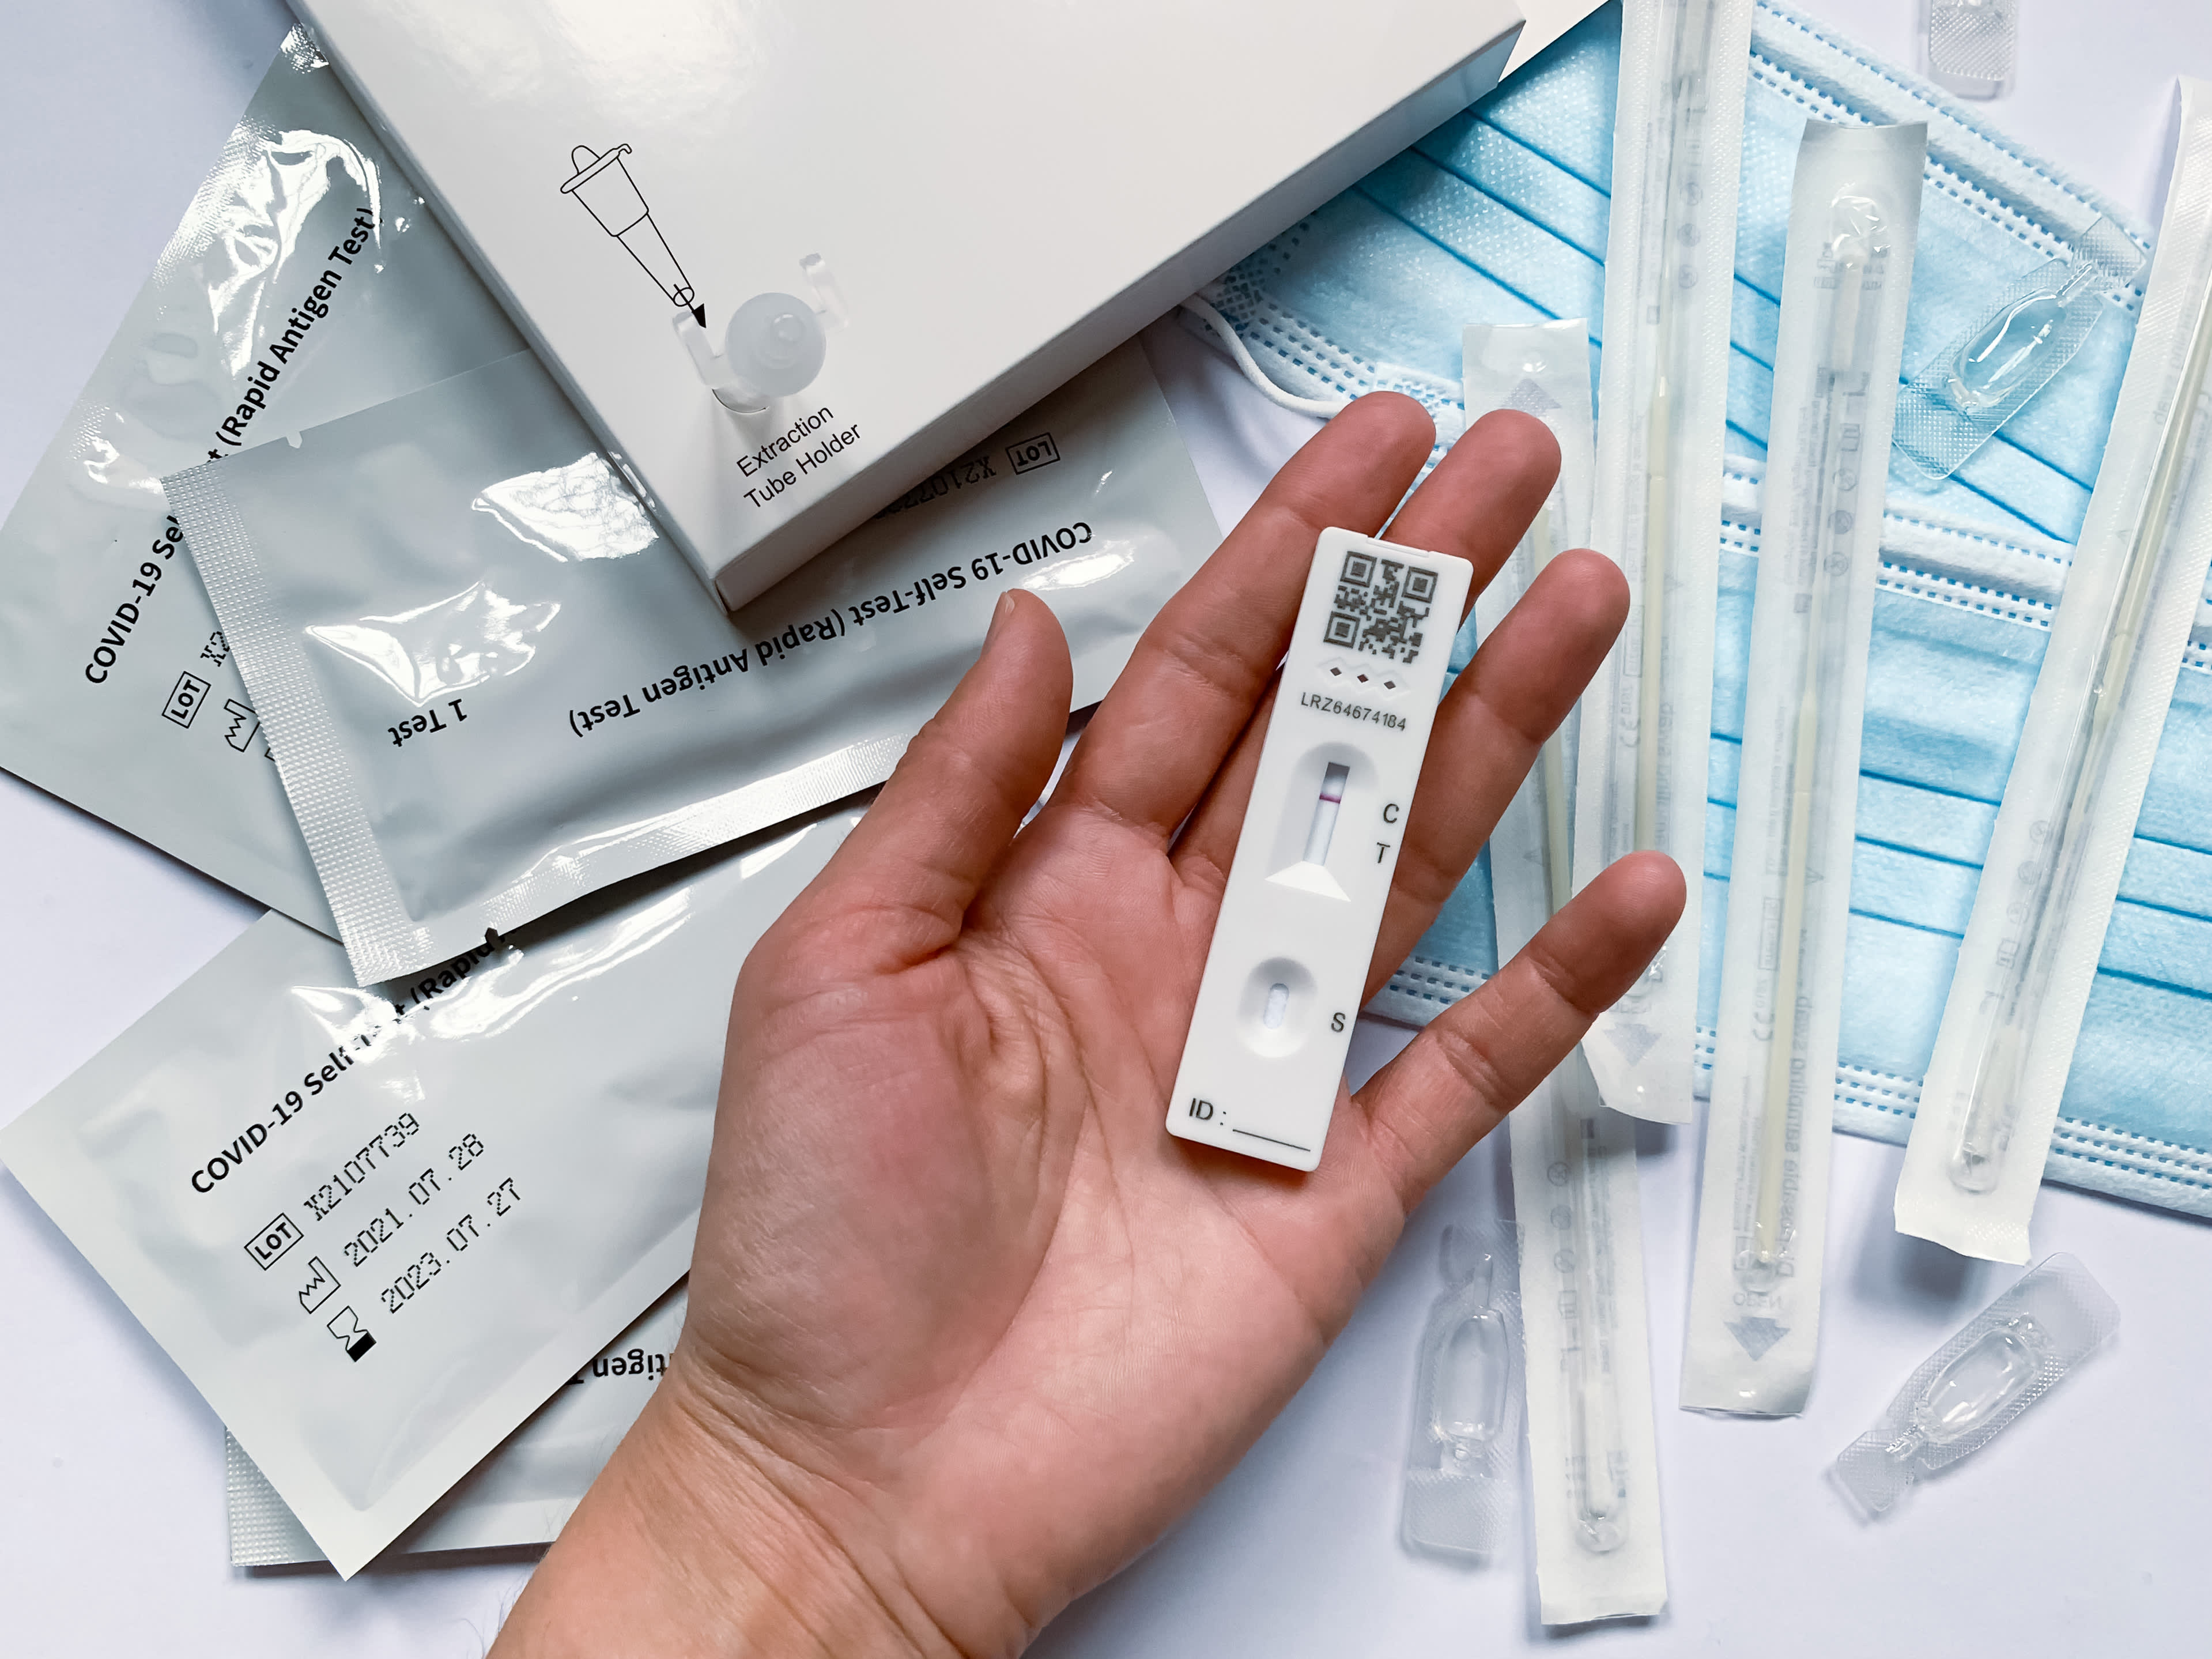 As STDs Proliferate, Companies Rush to Market At-Home Test Kits